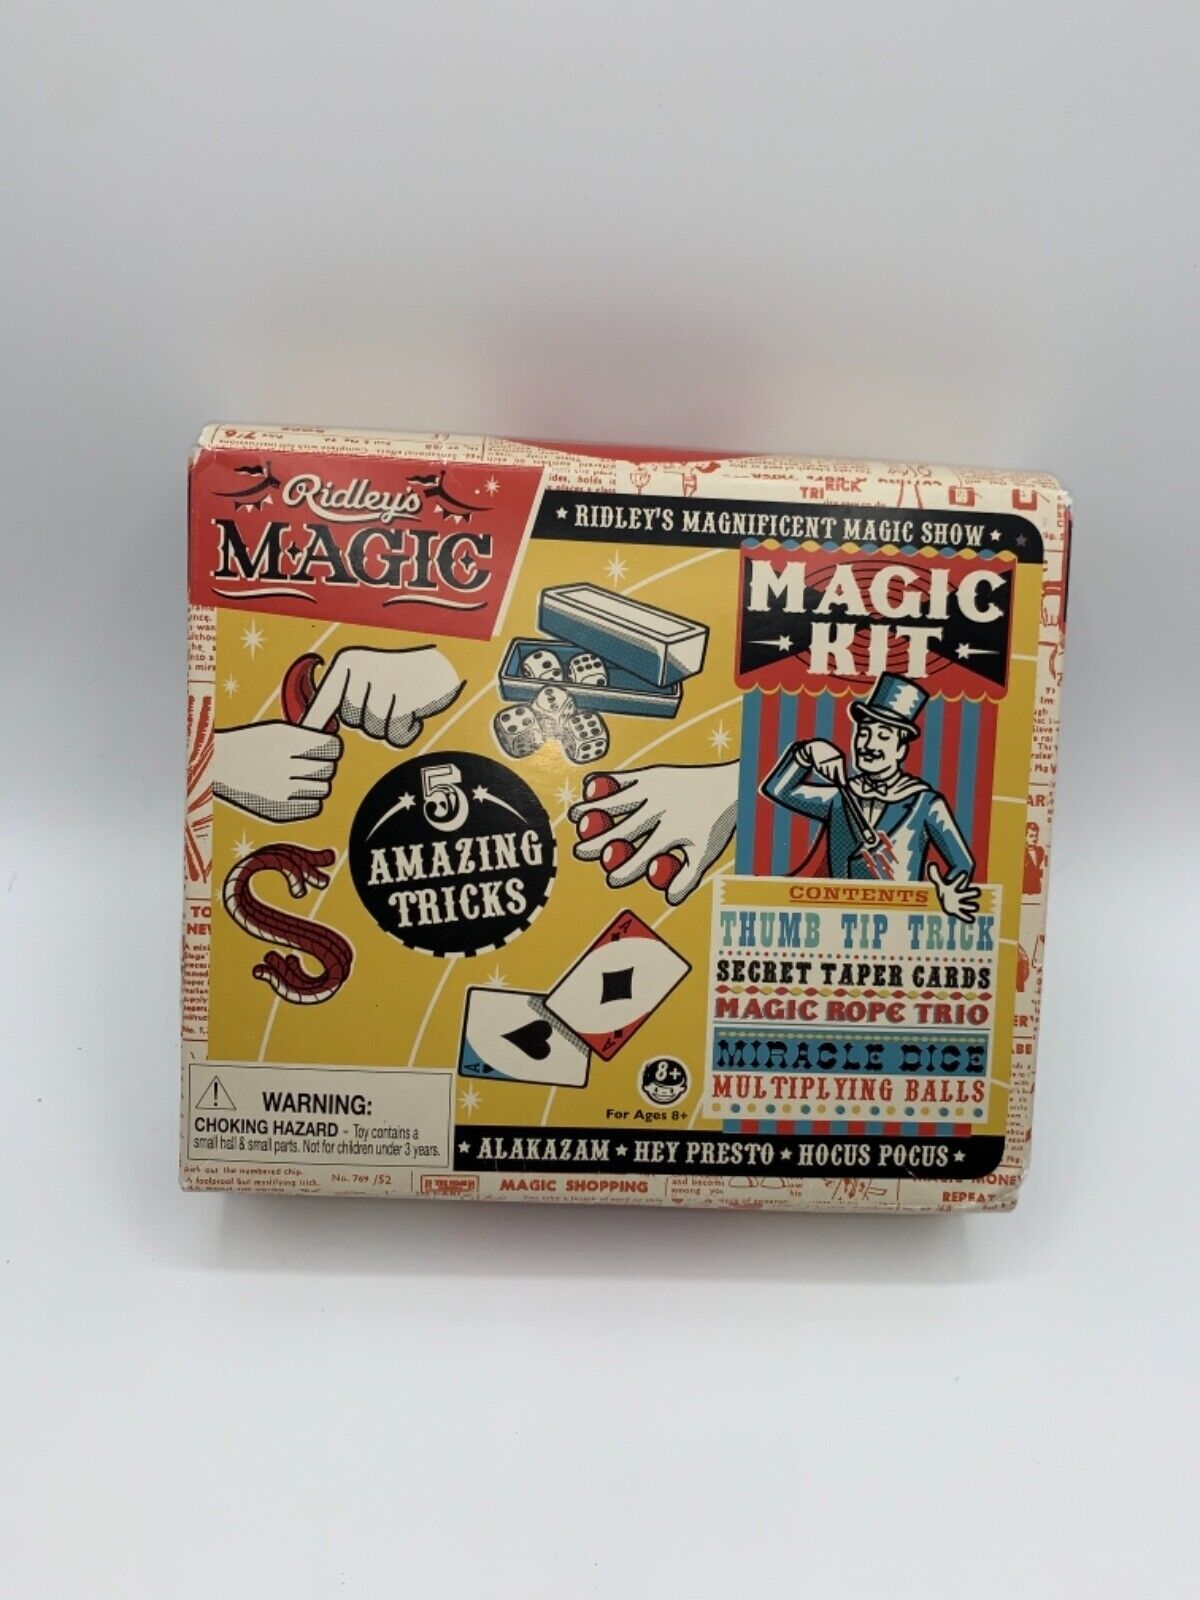 MAGIC KIT Ridleys Magic 5 Amazing Tricks Ages 8 And Up 2017 NEW IN BOX